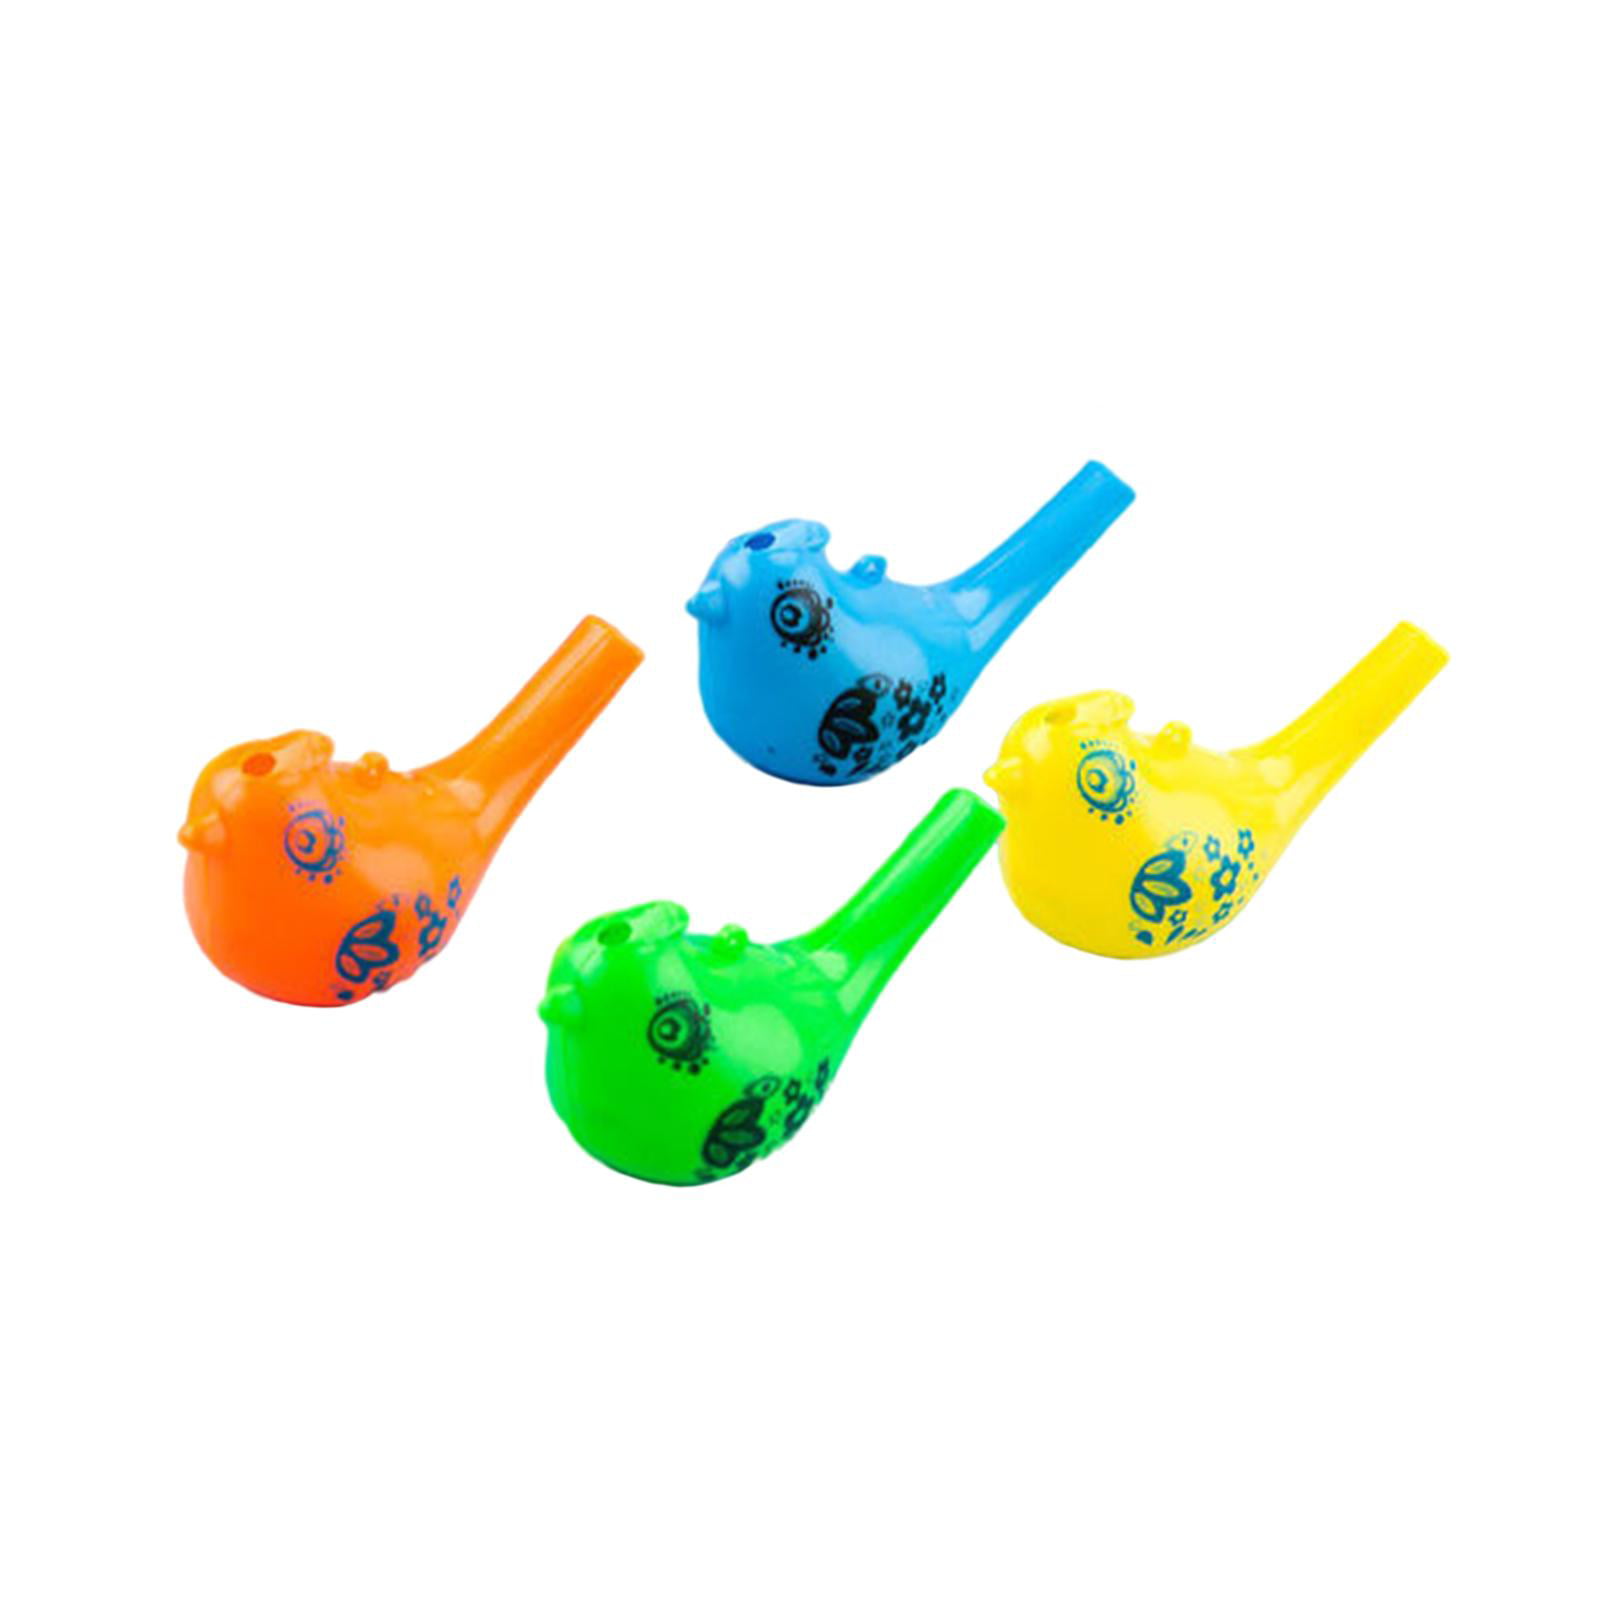 4 Pcs Whistle Children Musical Instrument Beginner Playing Educational Toys New 